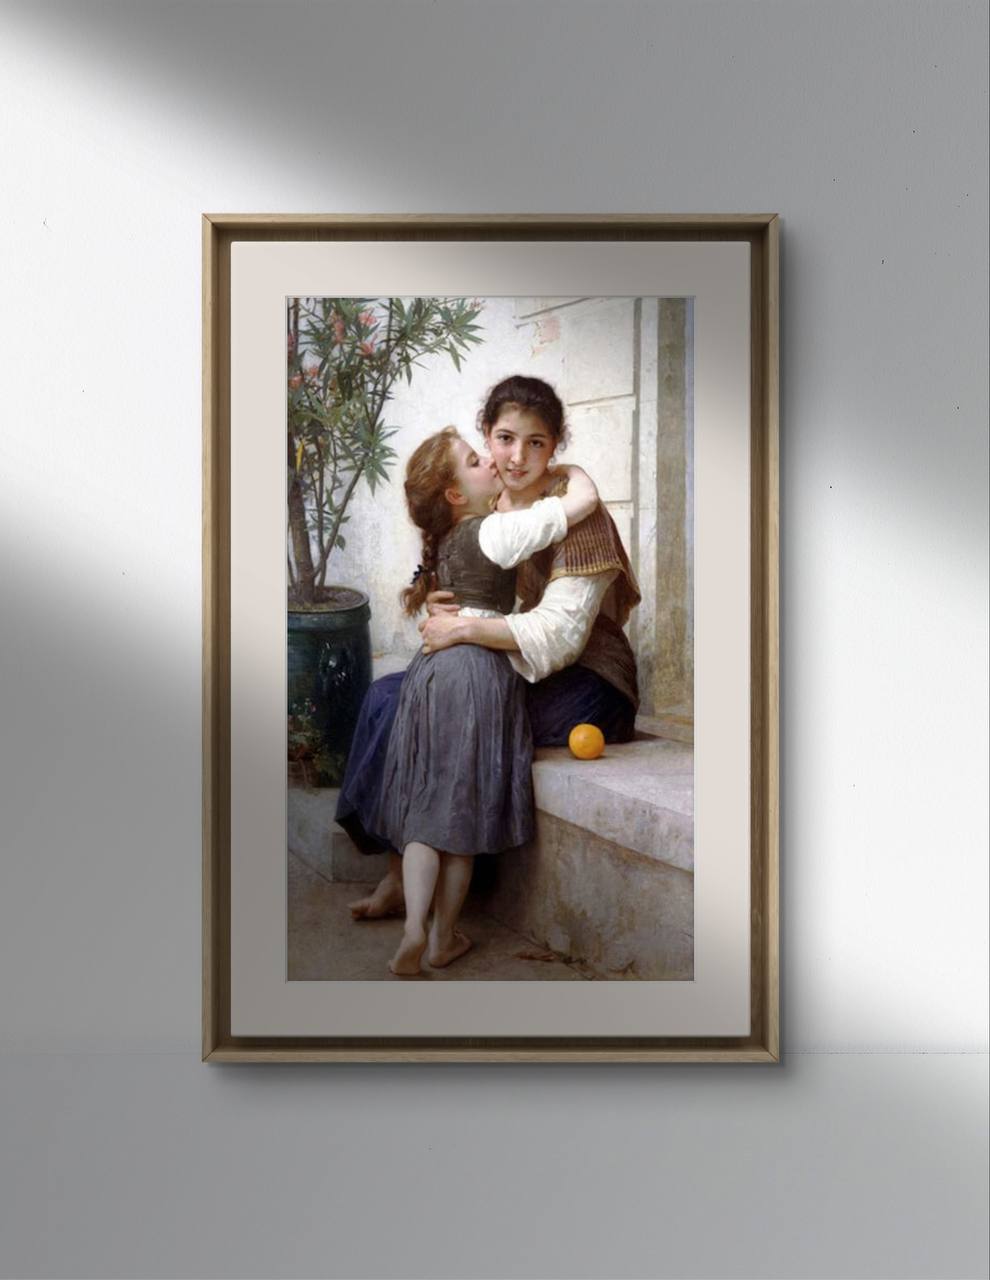 The first image shows a framed poster of William Bouguereau's painting "Calinerie." The artwork depicts a young girl embracing her older sister, who sits on a stone ledge. The older sister looks at the viewer with a gentle smile, while the younger girl rests her head on her sister’s shoulder. A potted plant and an orange on the ledge add to the serene setting. The poster is presented in a simple frame against a light background.